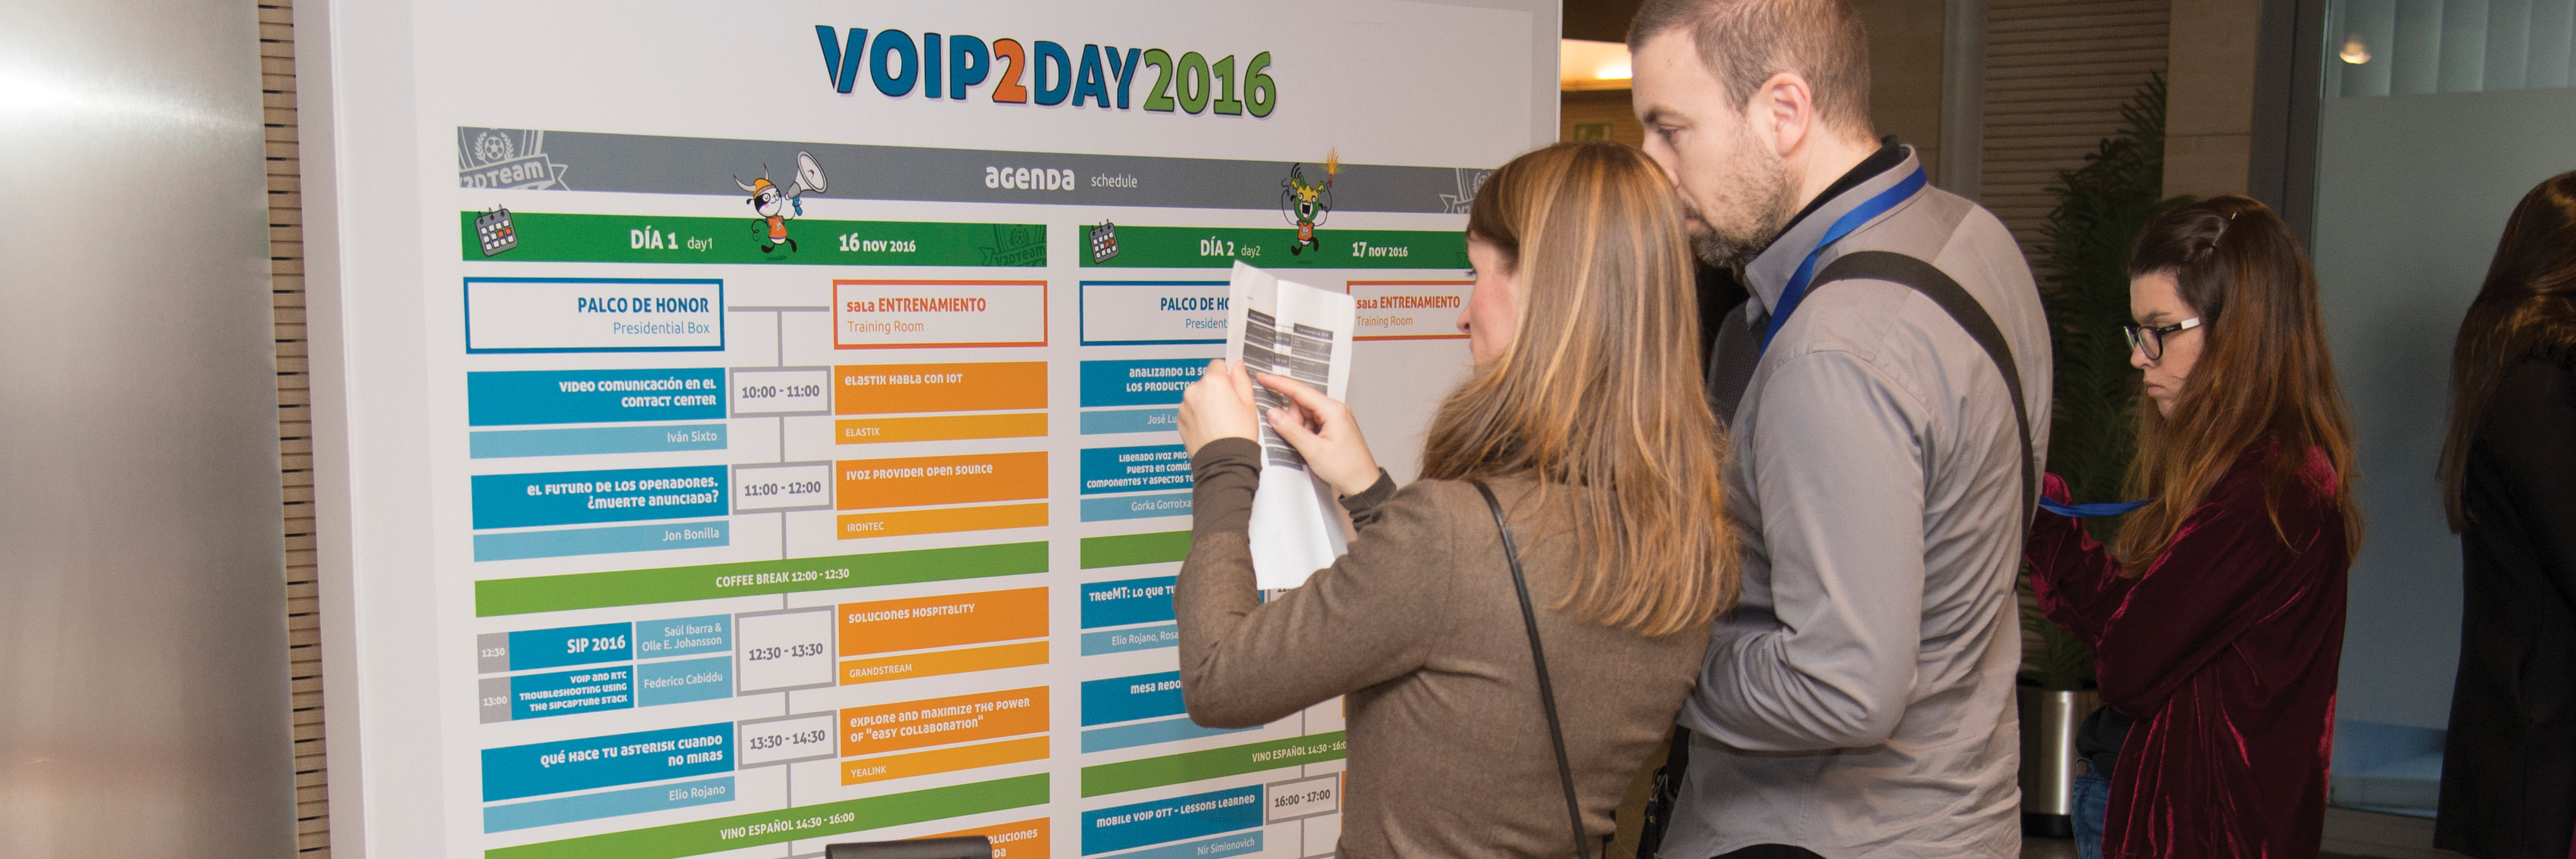 VoIp2Day 2016